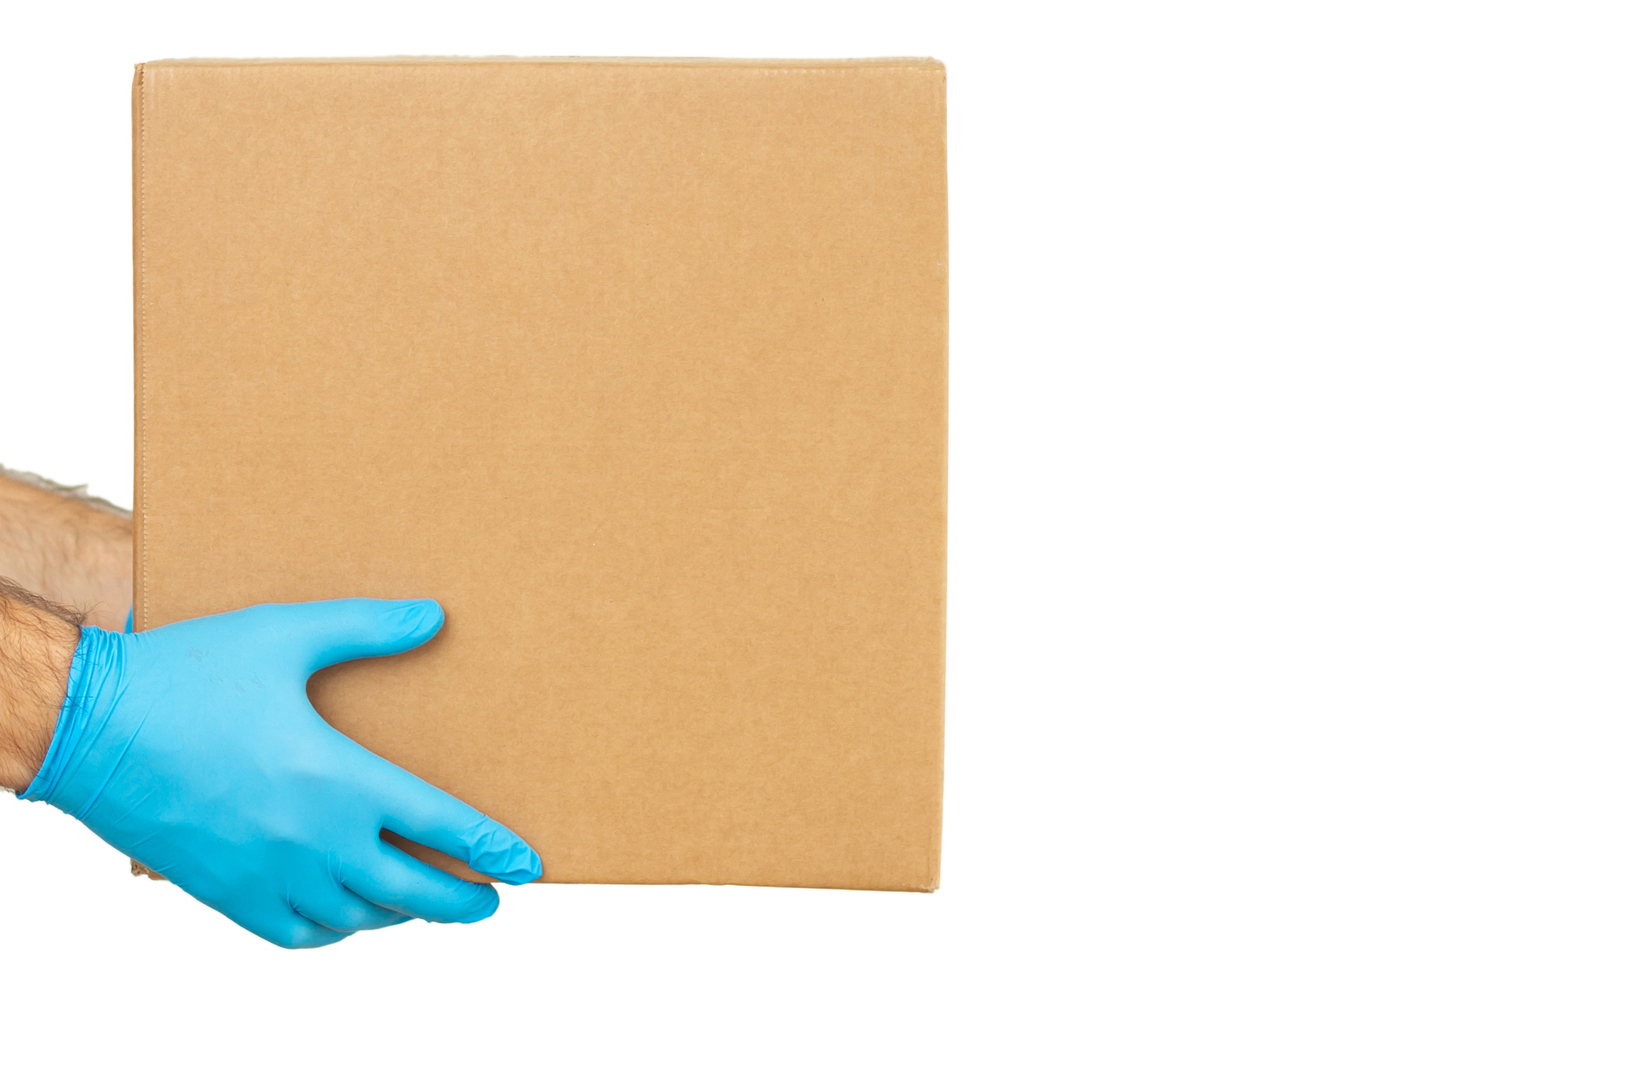 Delivery man holding cardboard boxes / copy space. Delivery by courier in medical rubber gloves. The shipping time during coronavirus